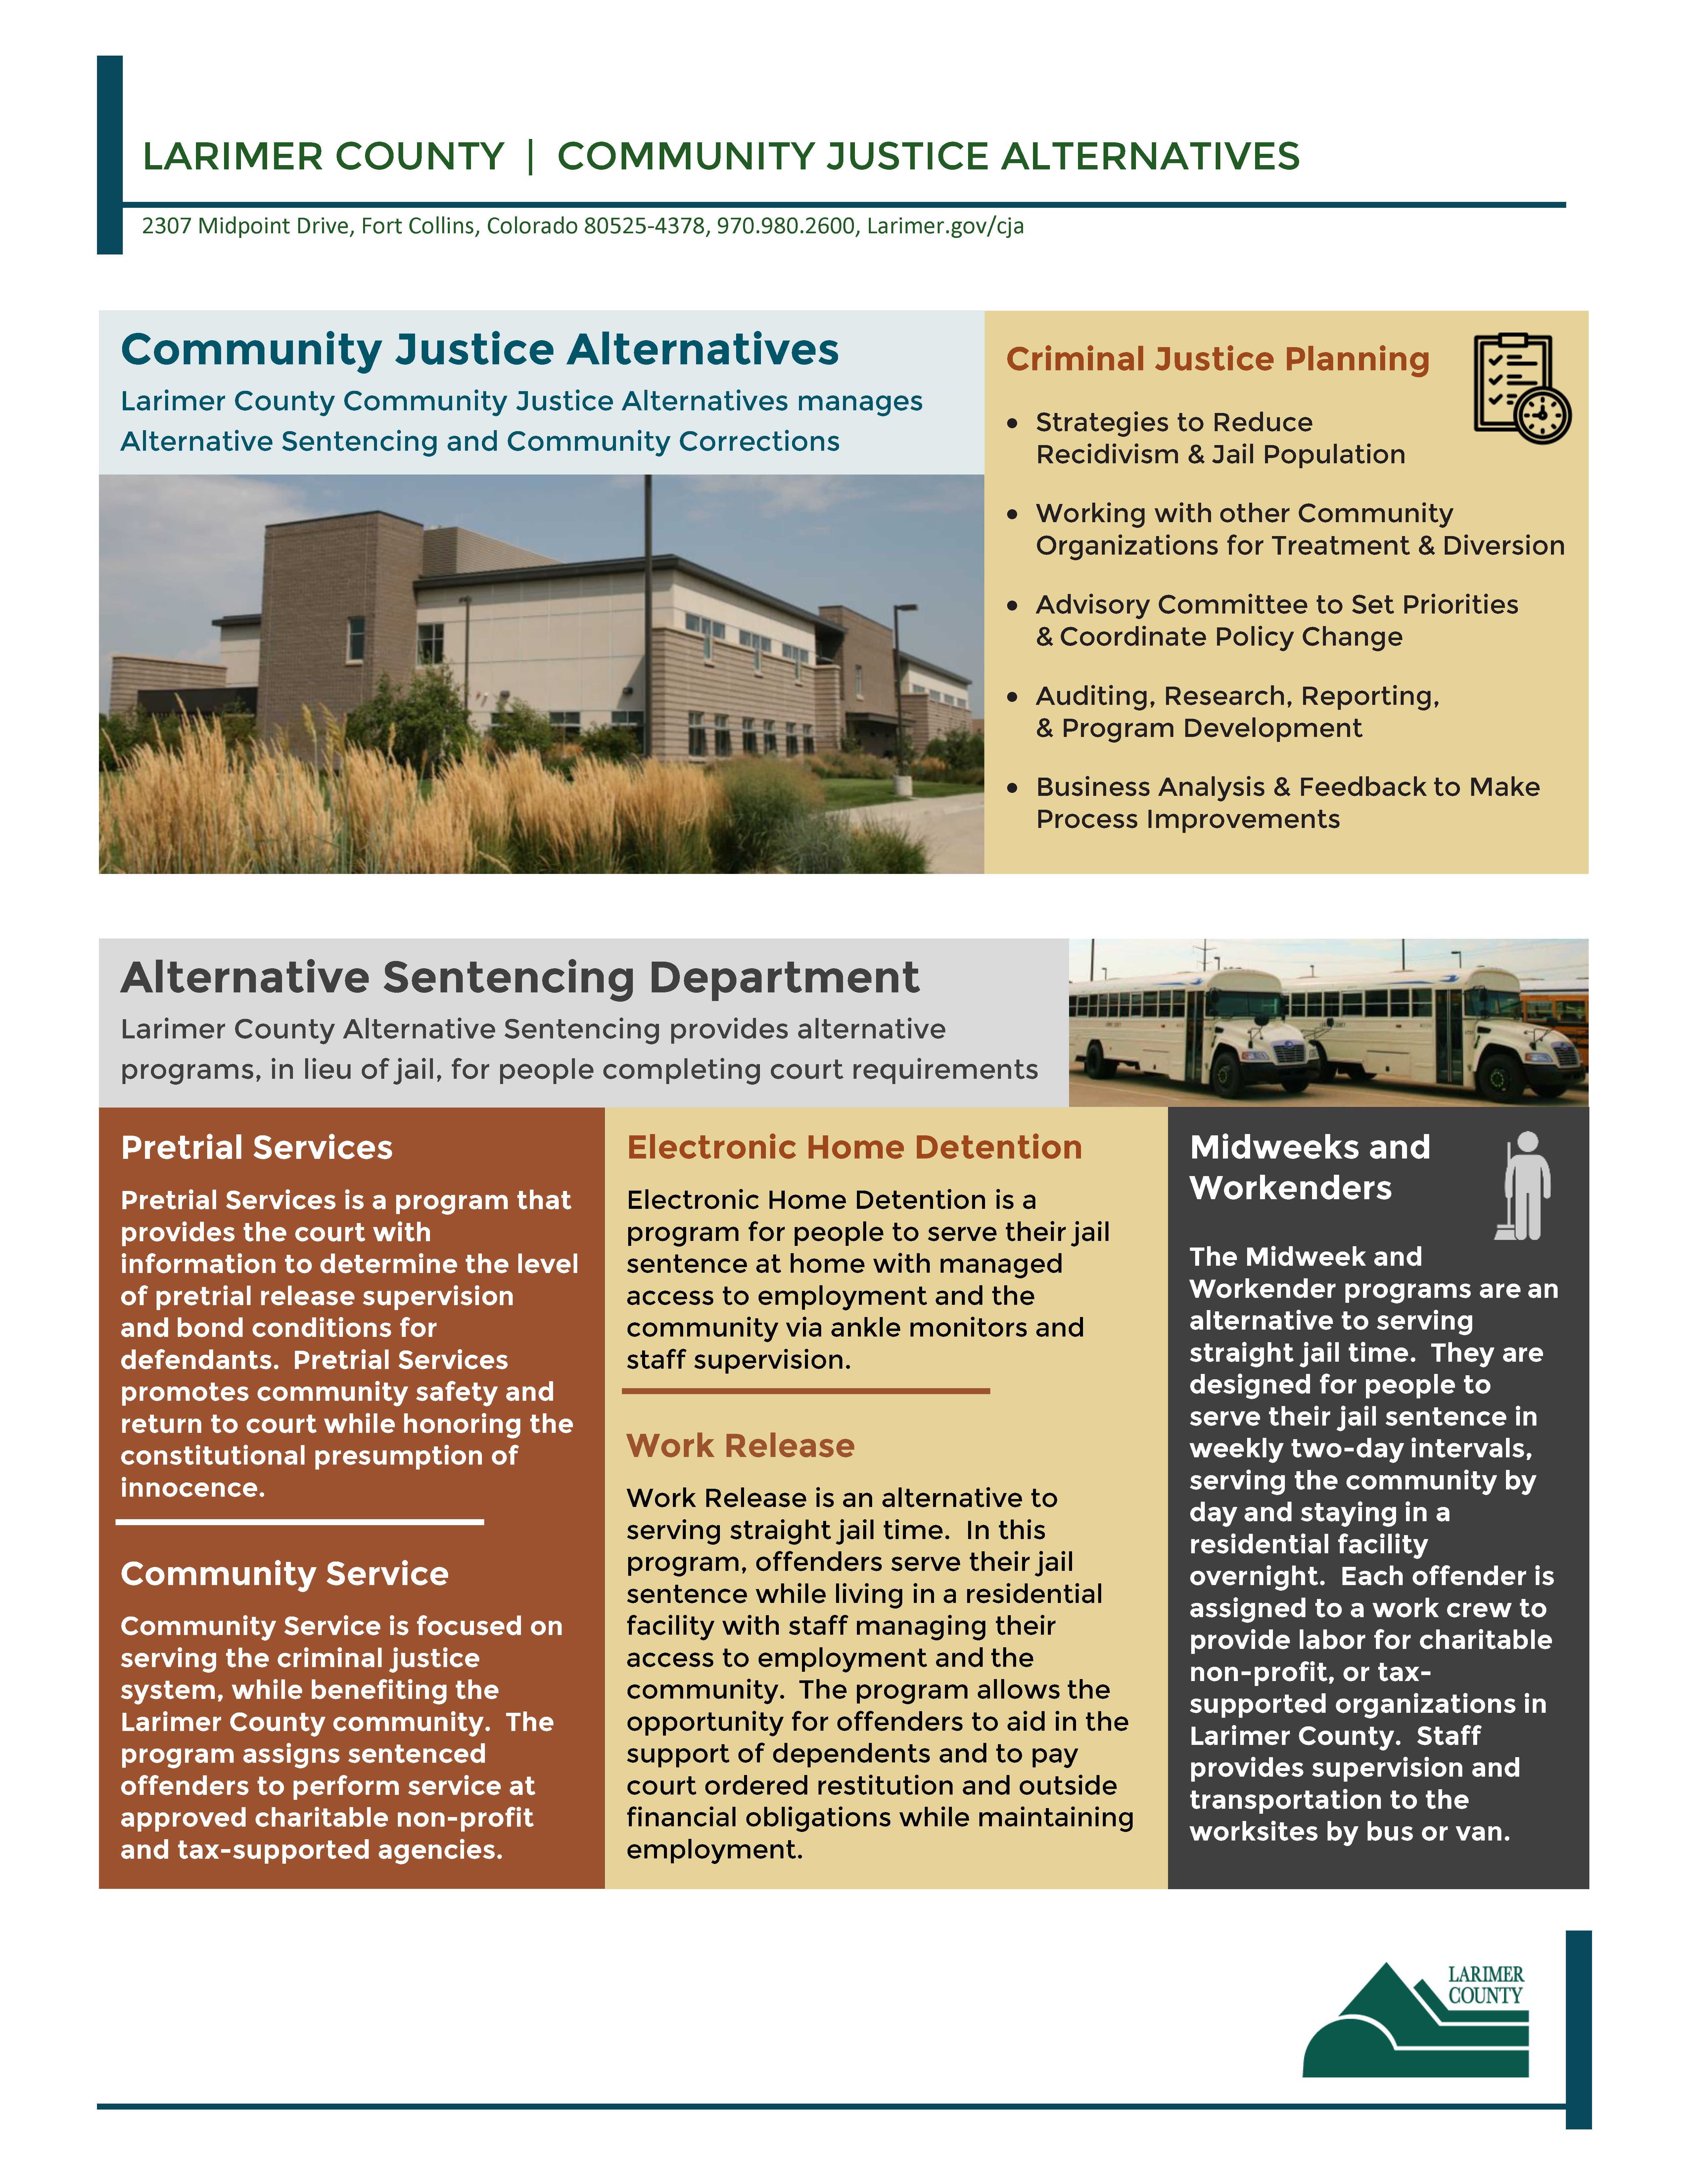 Image 1: CJA Programs Overview - Page 1 of 2